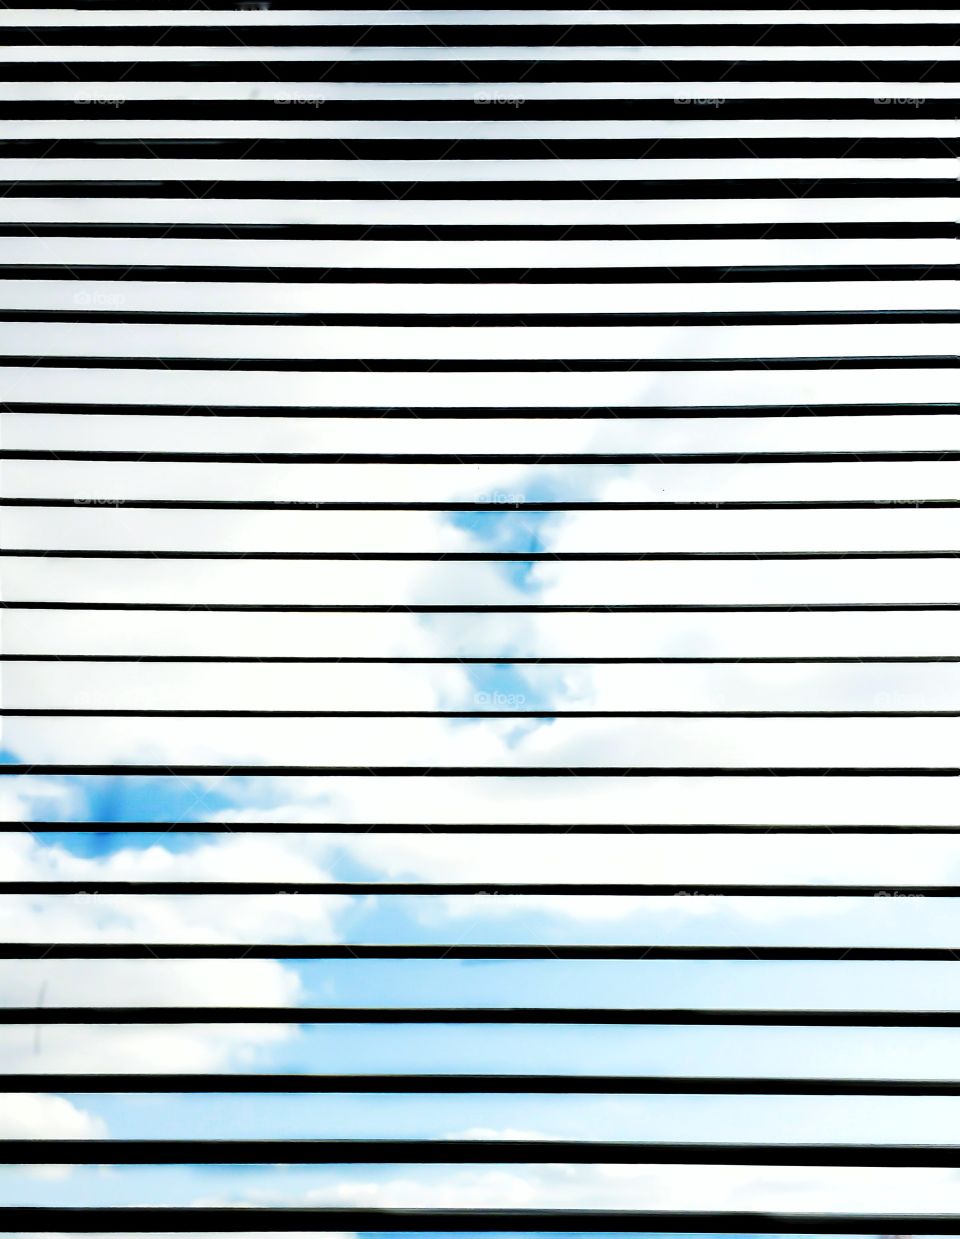 looking at blue sky and clouds through window blinds